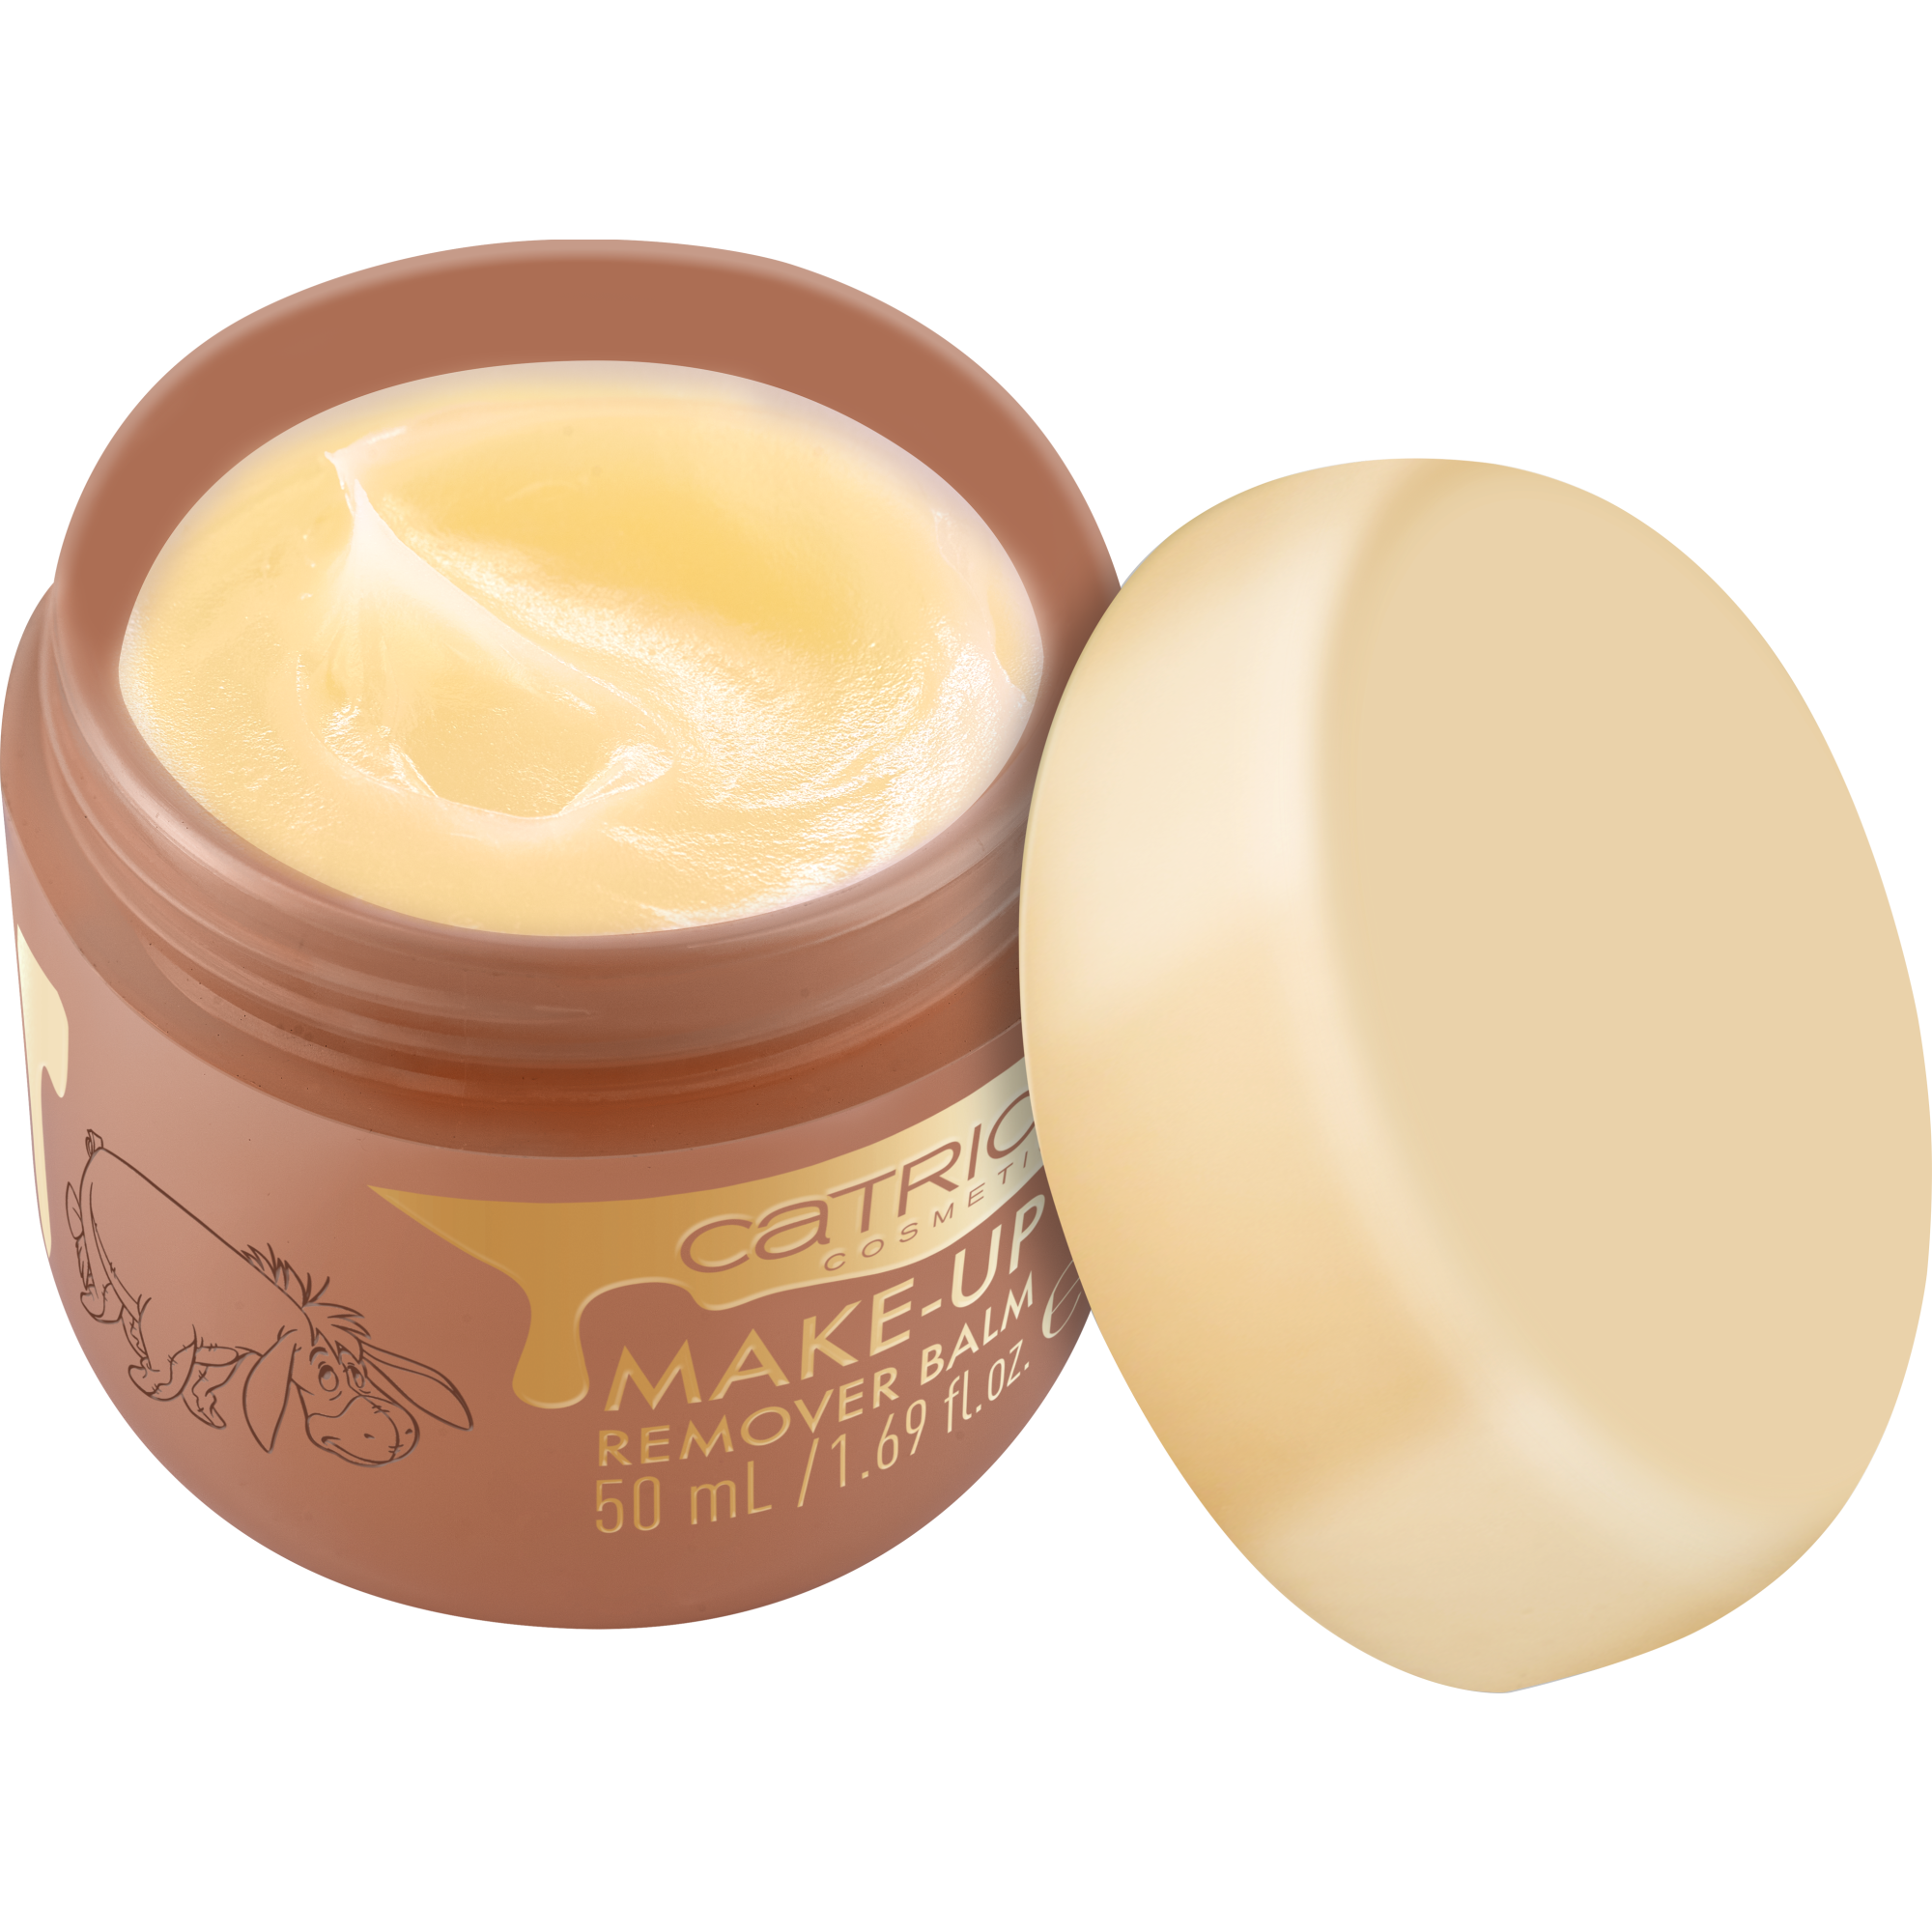 Disney Winnie the Pooh Make-up Remover Balm baume démaquillant